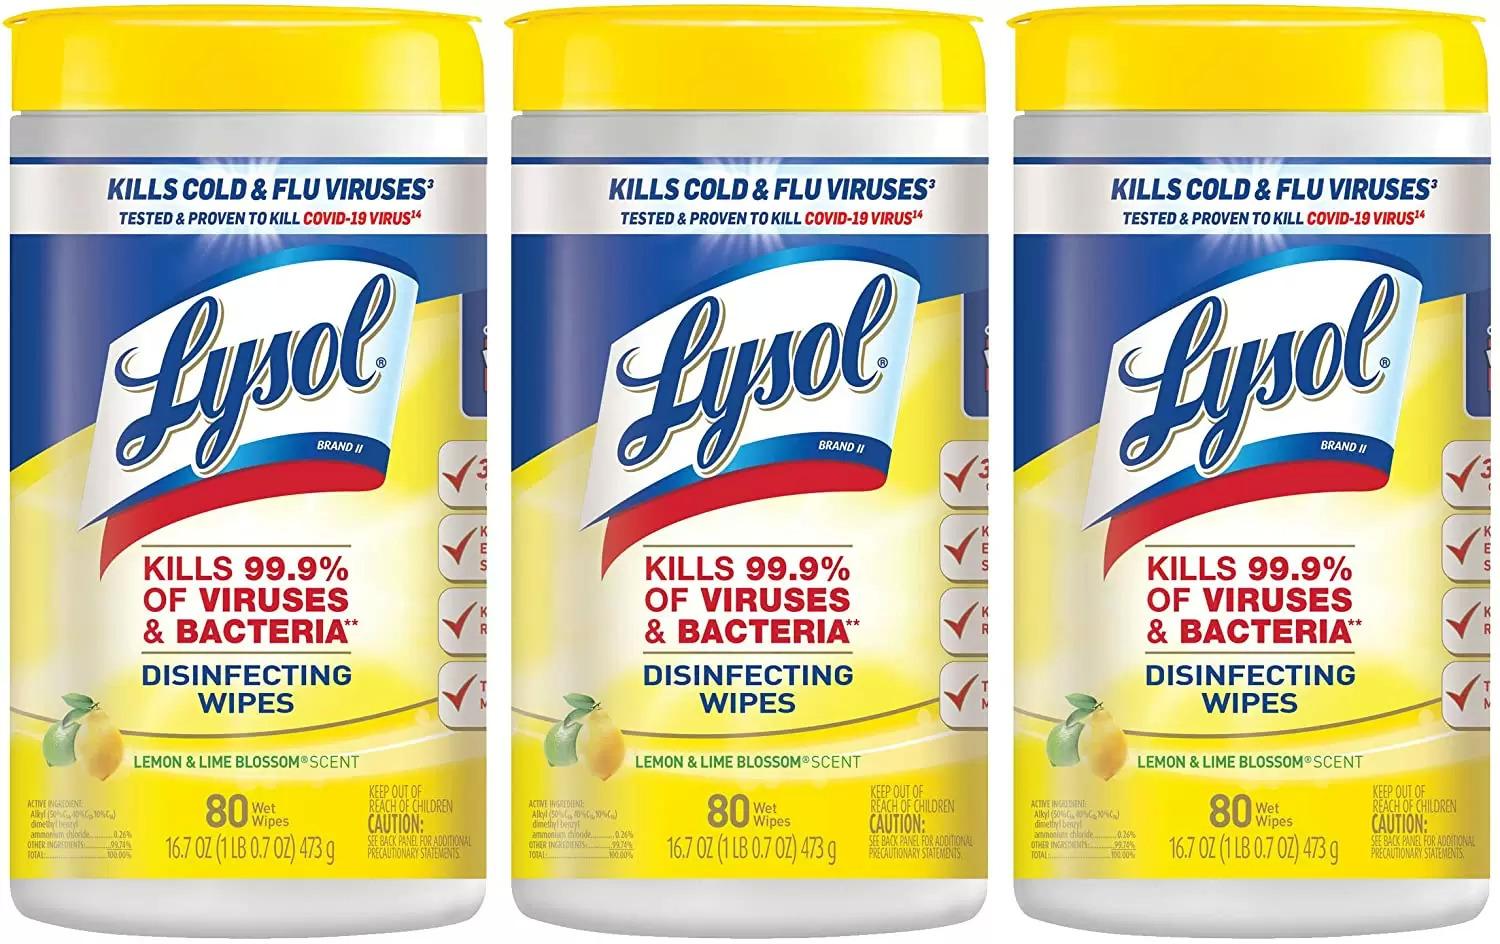 240 Lysol Disinfecting Wipes for $6.25